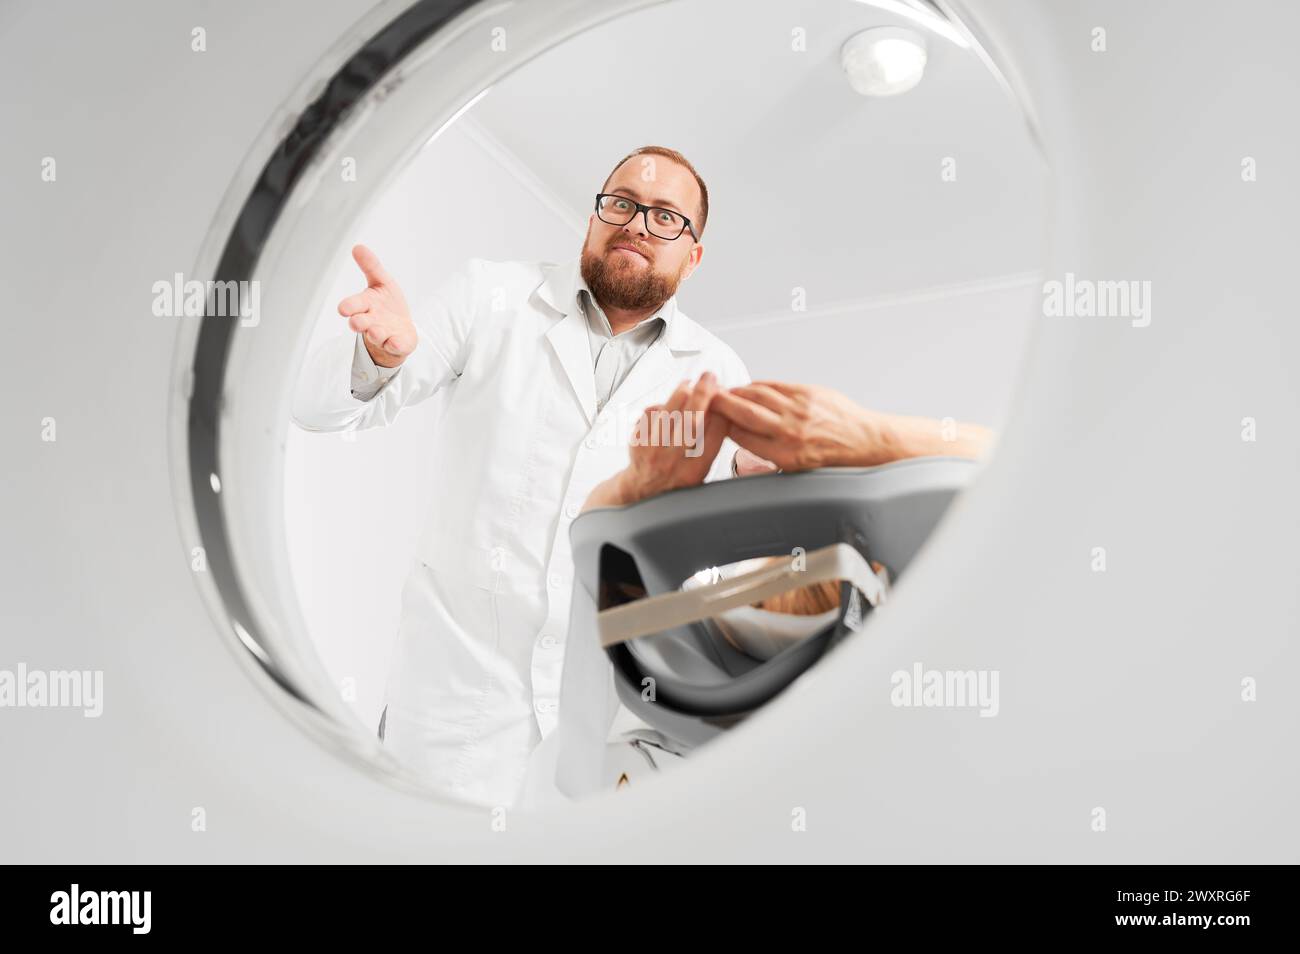 Medical computed tomography or MRI scanner. Male radiologist examine female patient, looking to the camera. Concept of modern diagnostics. Stock Photo